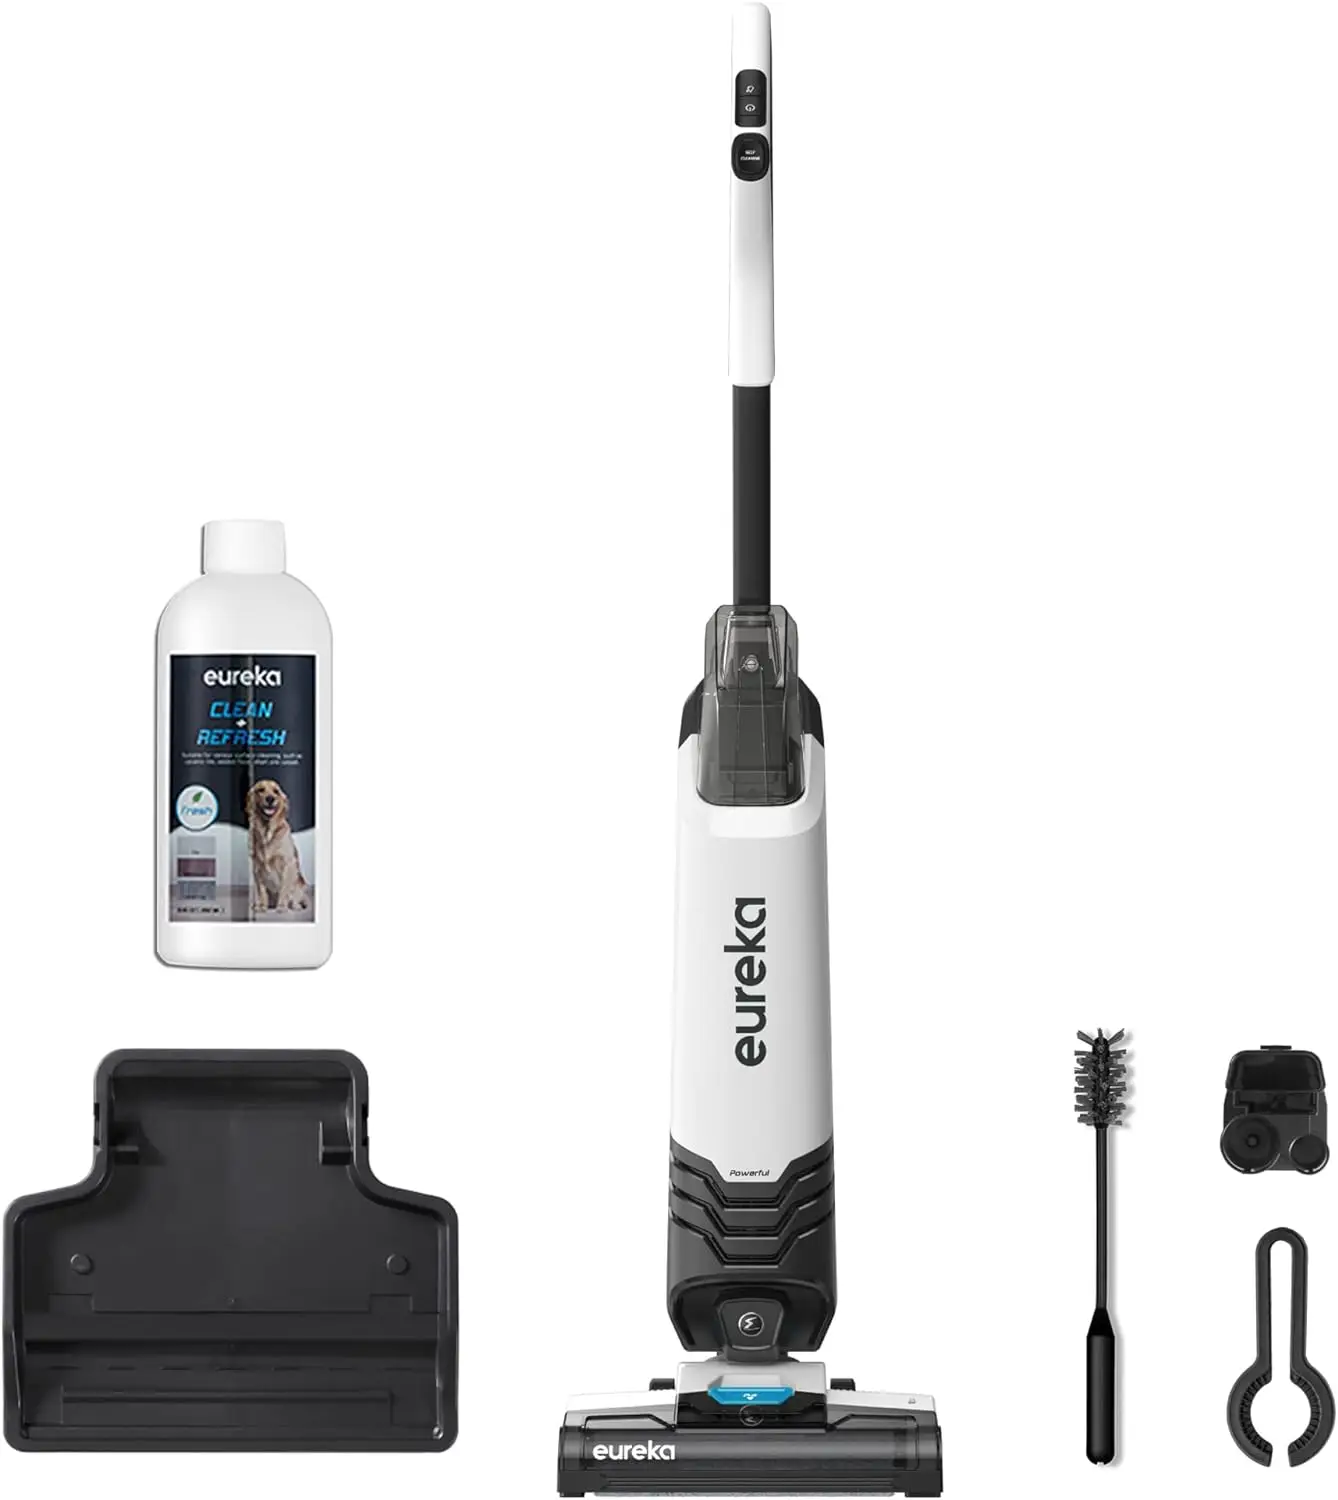 

EUREKA All in One Wet Dry Vacuum Cleaner and Mop for Multi-Surface, Corded Lightweight Self-Cleaning System, for Hard Floors